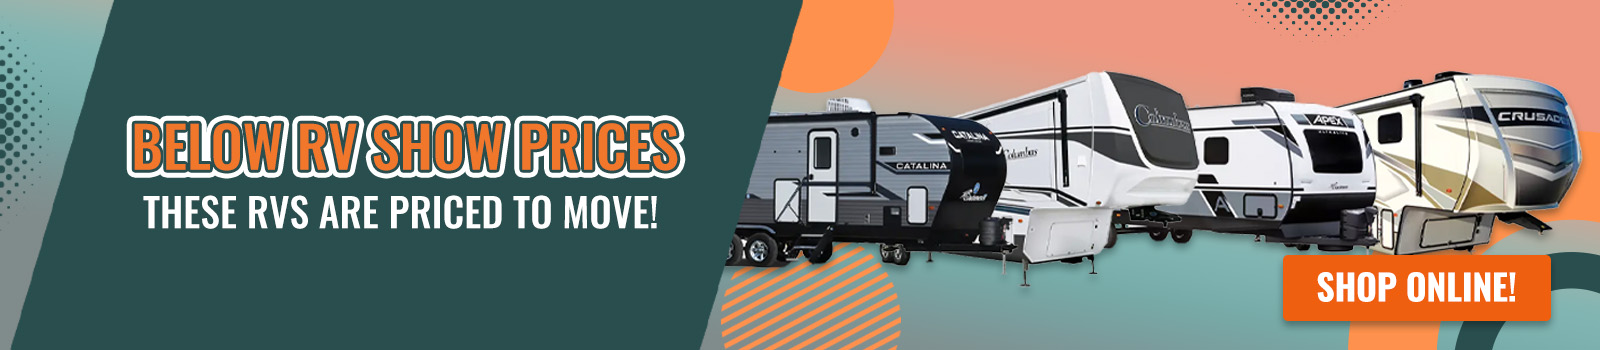 RV Show Pricing Banner